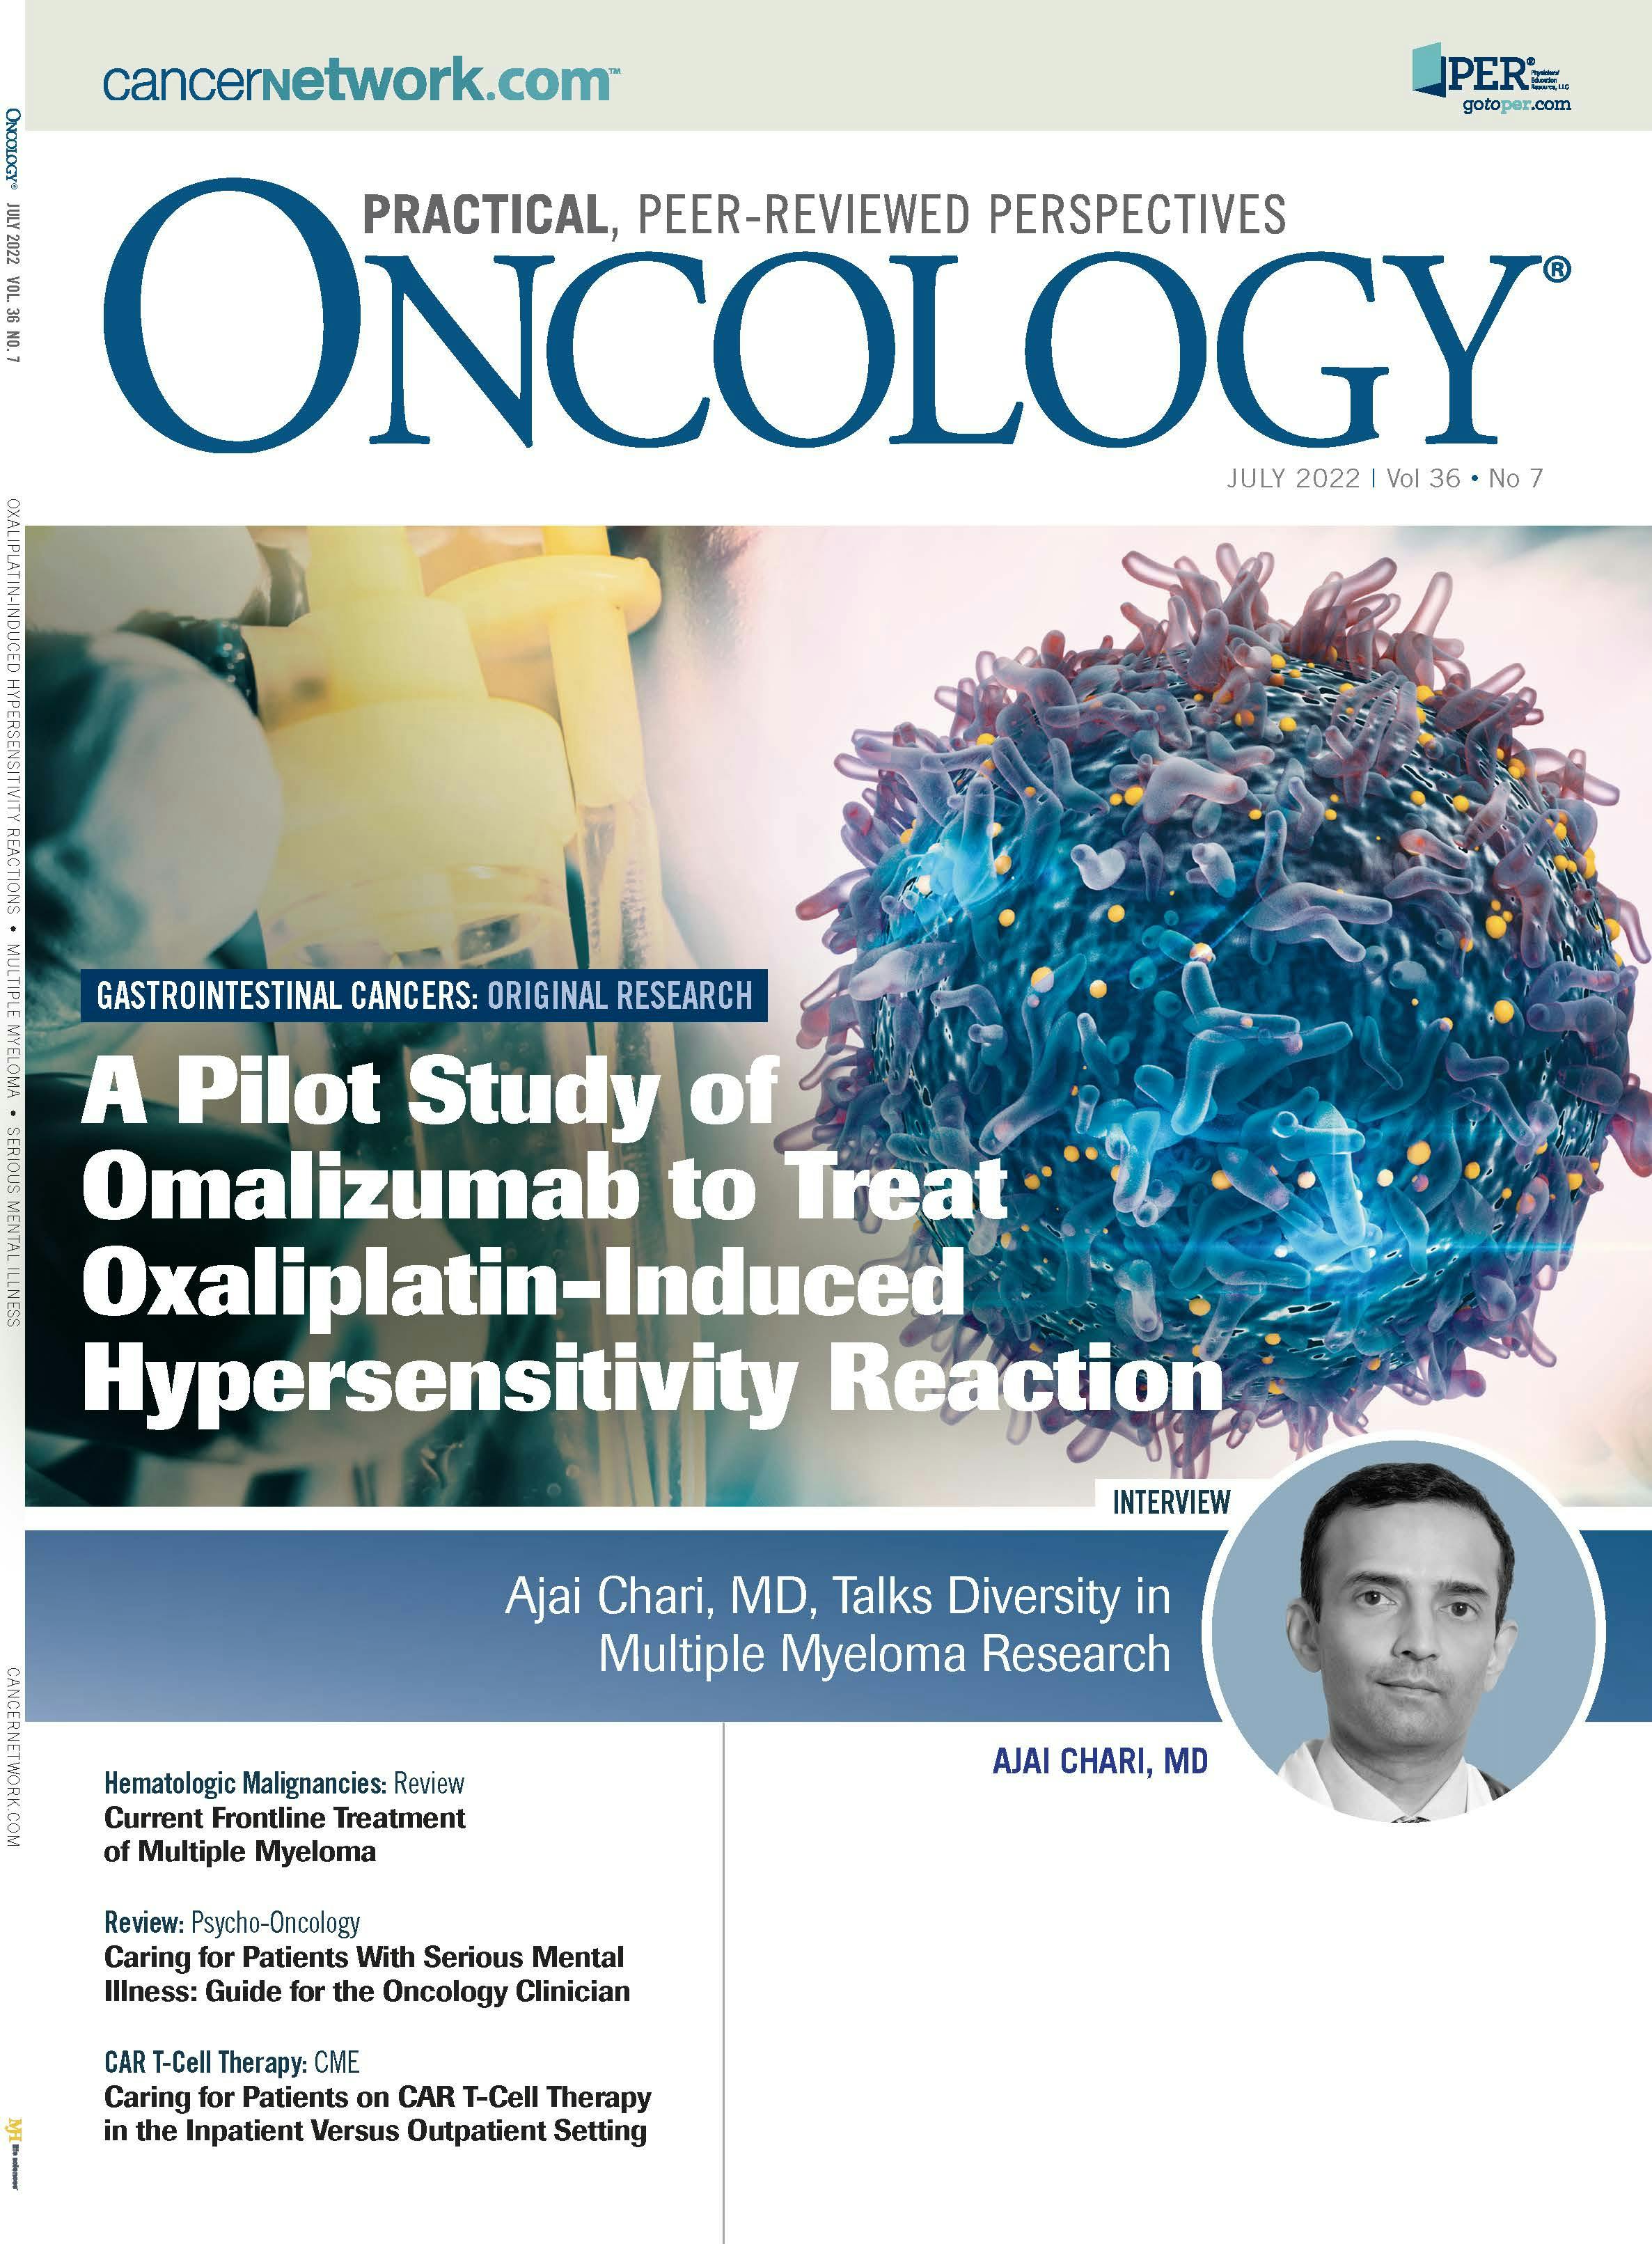 ONCOLOGY Vol 36, Issue 7